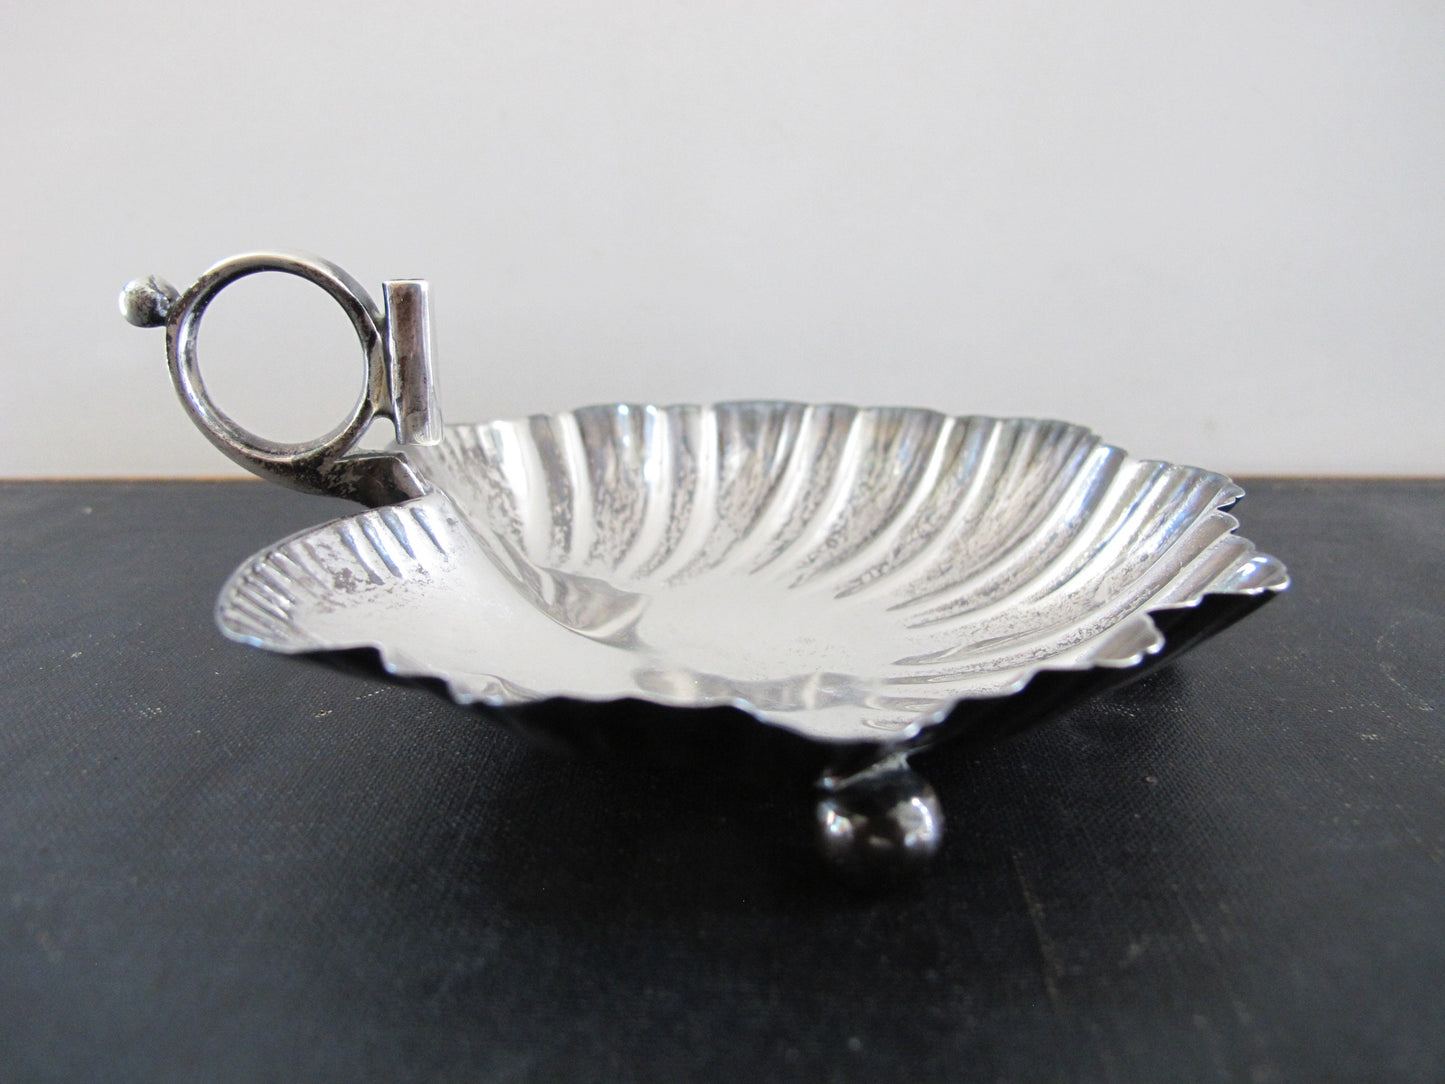 Shell Leaf Silverplate Handled Tray Incense Holder Fluted Reeded 1910s 1920s Edwardian Hotel Silver Silverplate Silver Plate